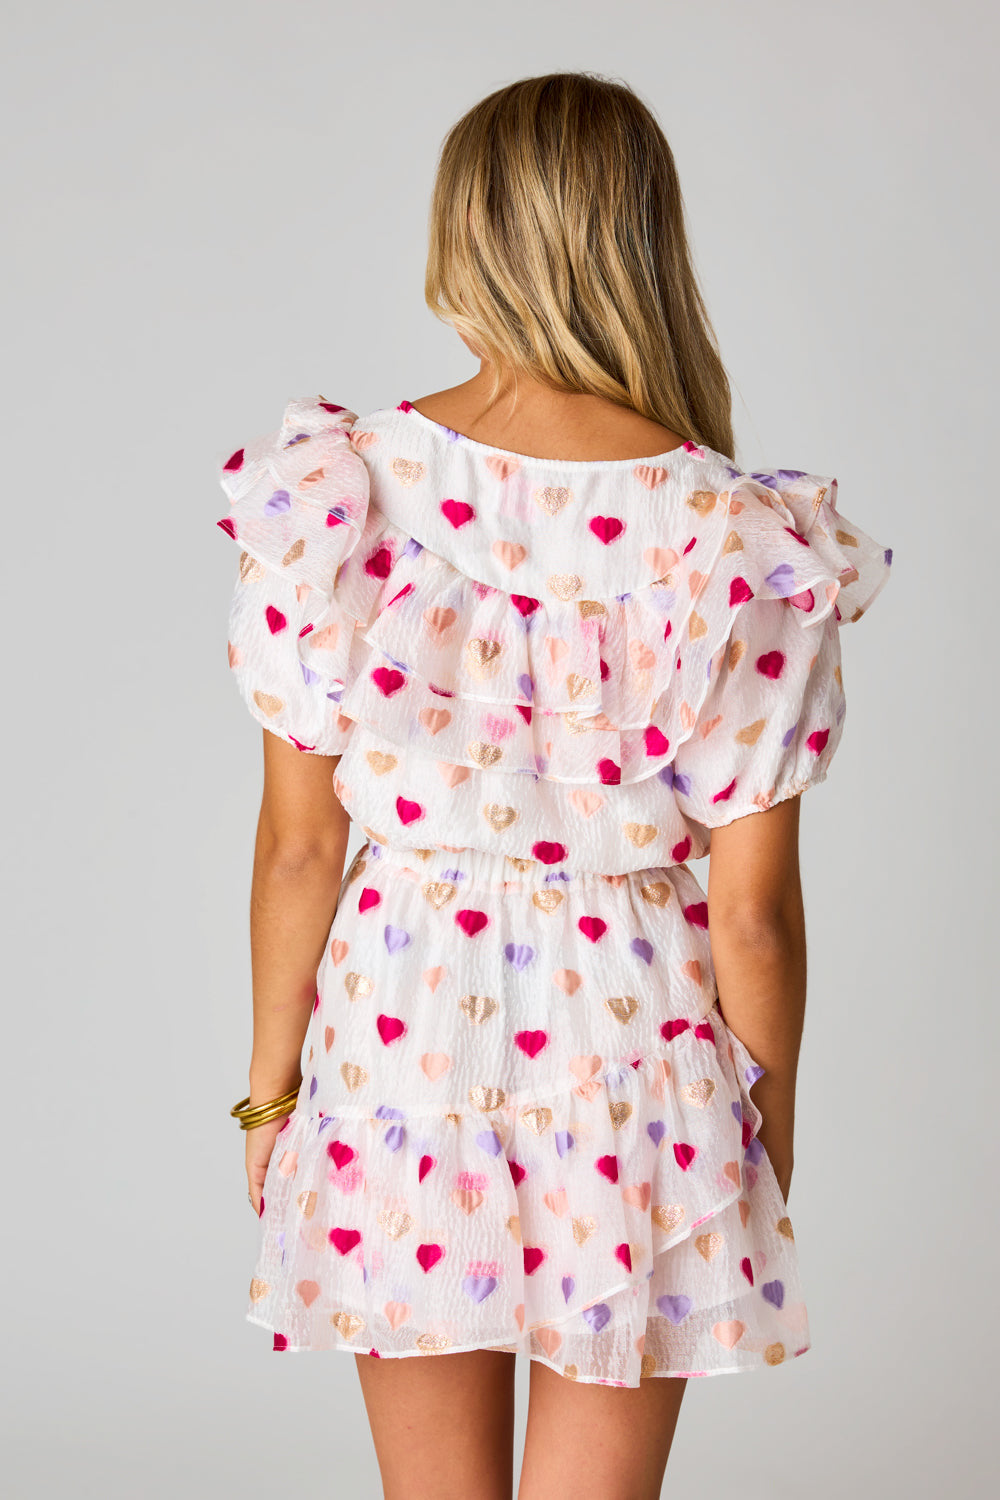 Apparel- Buddy Love Norma Kissing Booth Dress